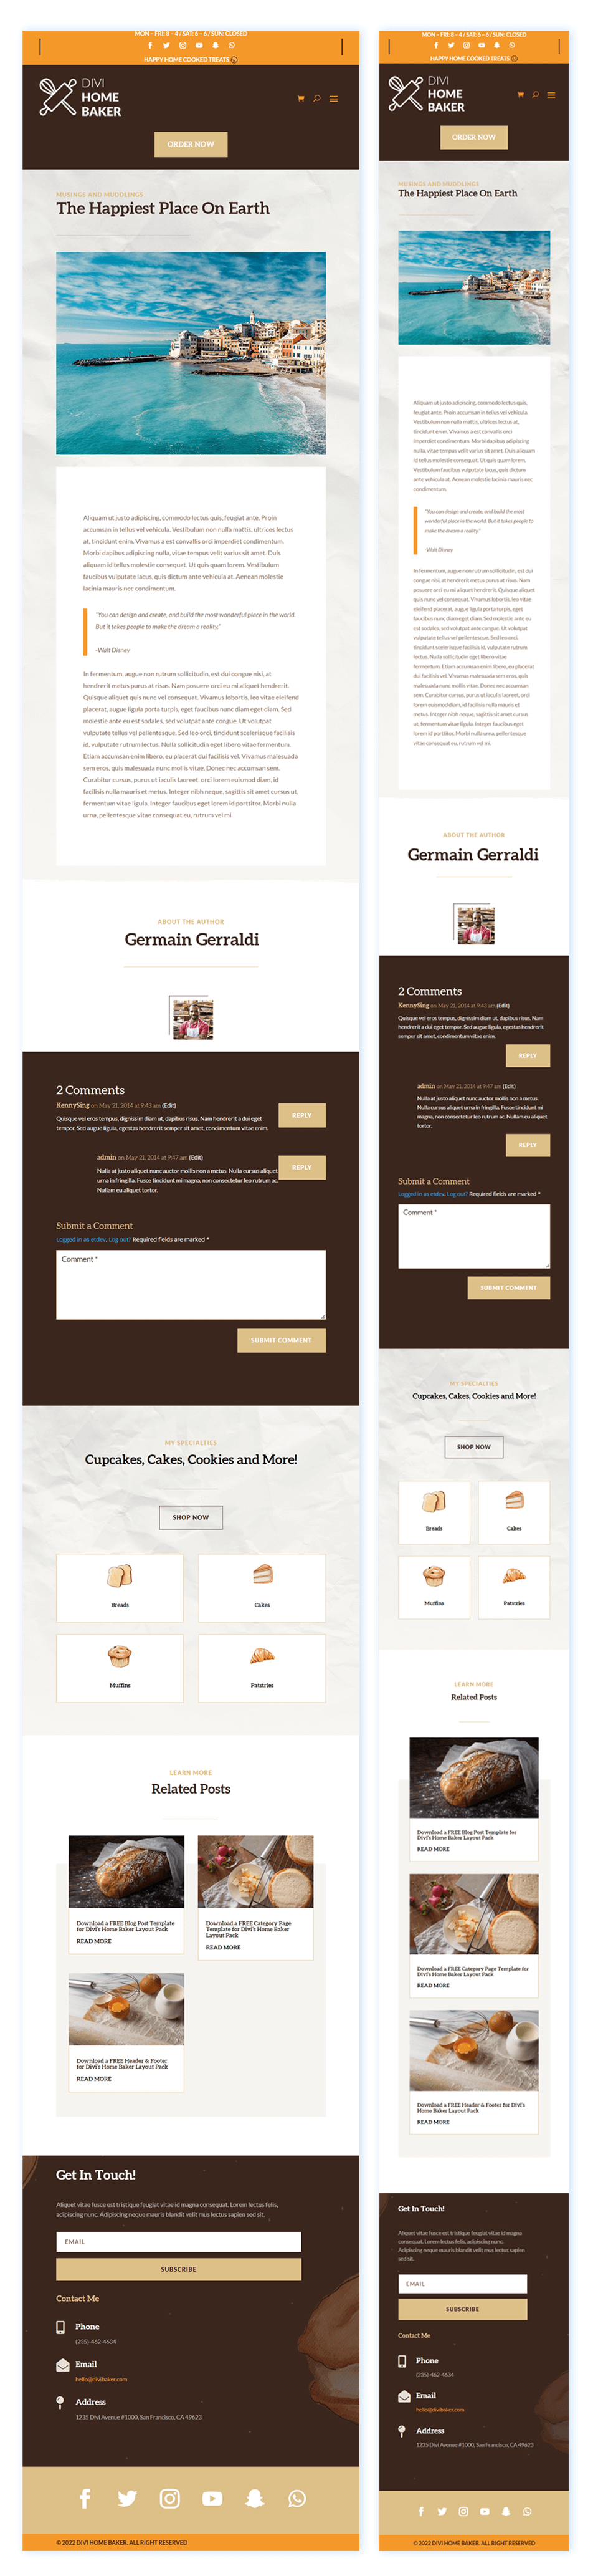 Tablet and Mobile View for the Blog Post Template of the Divi Home Baker Layout Pack